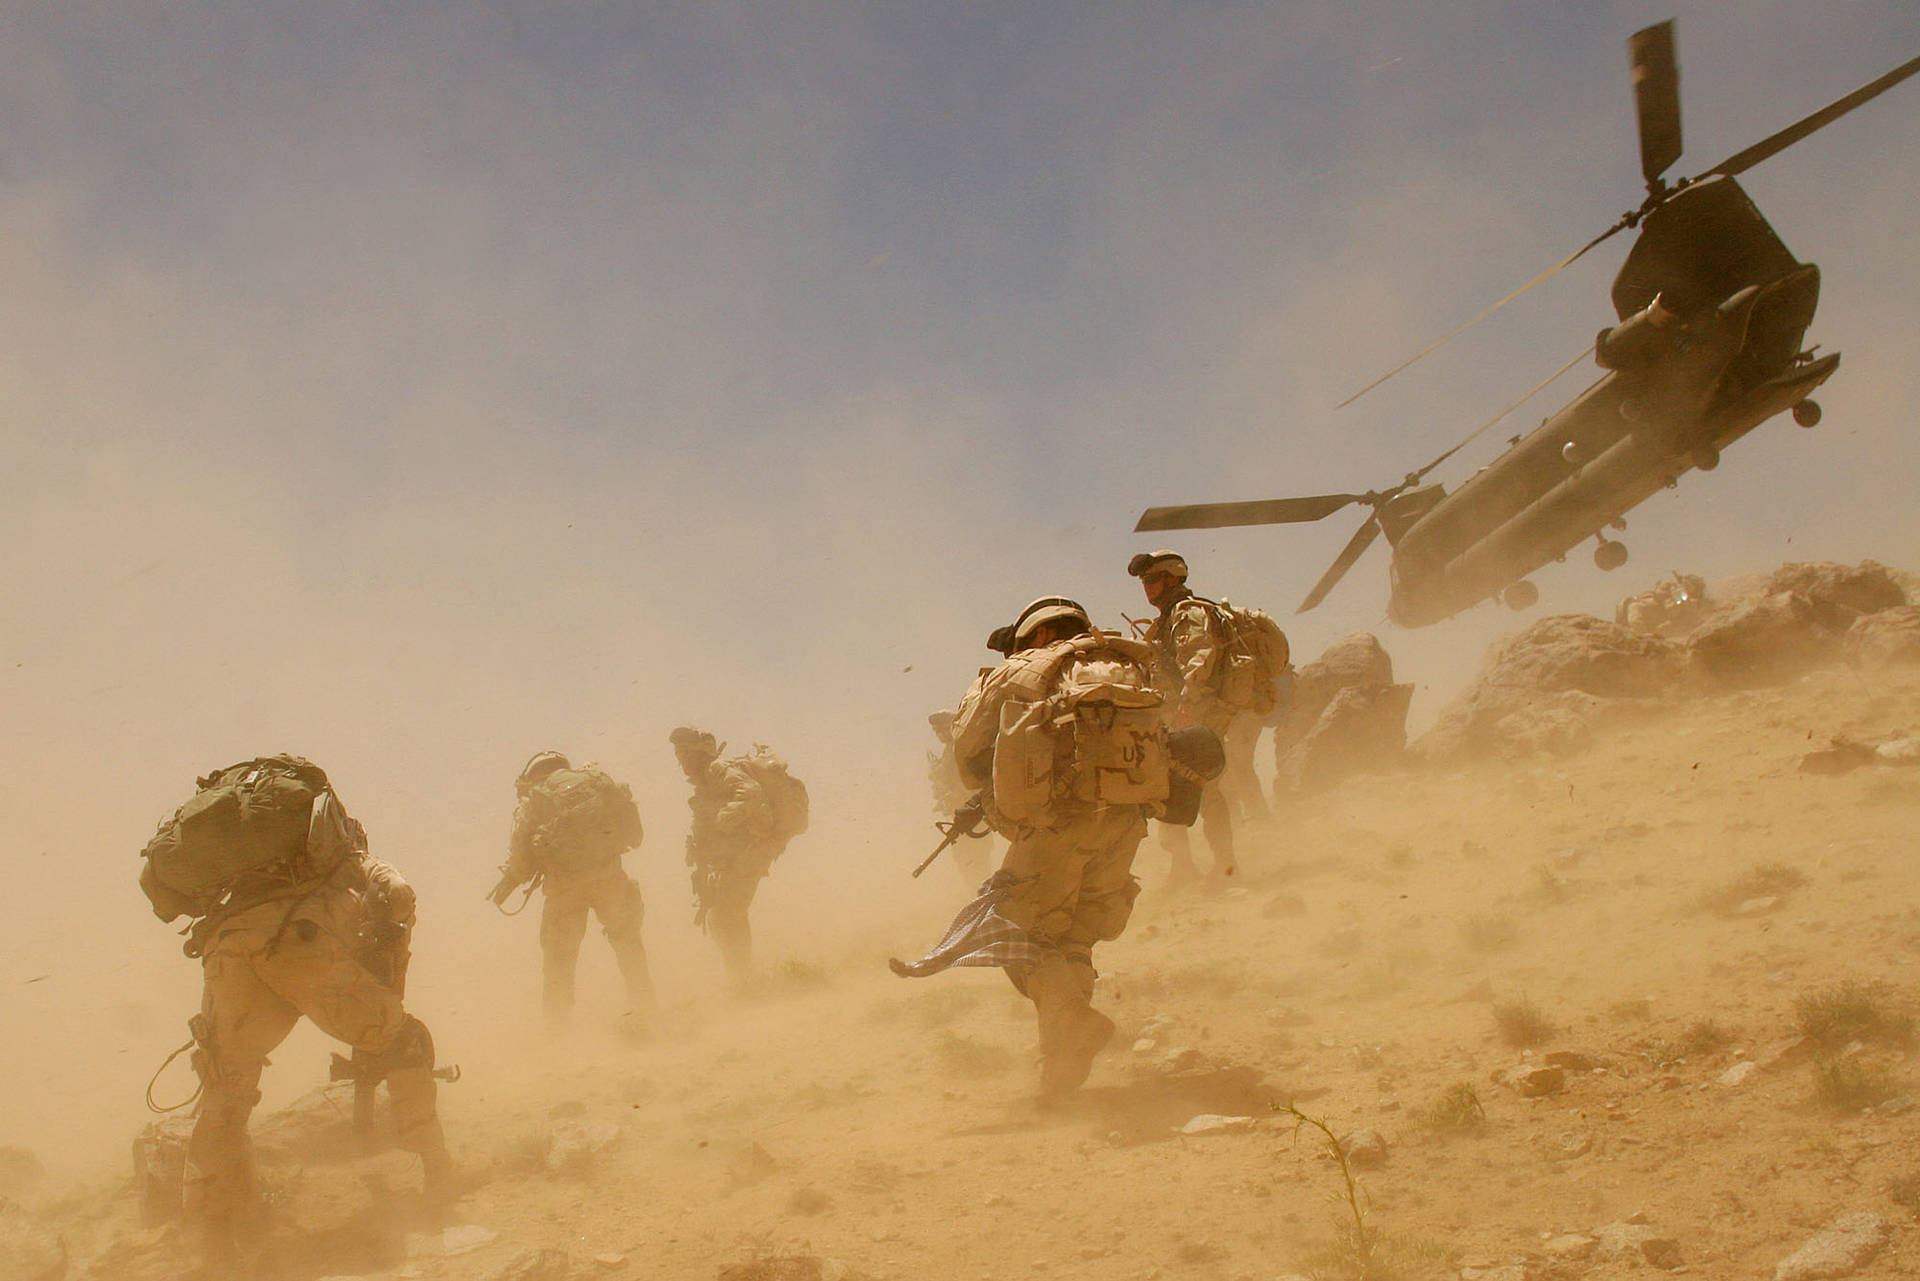 Caption: Afghanistan Military Forces In A Desert Storm Background